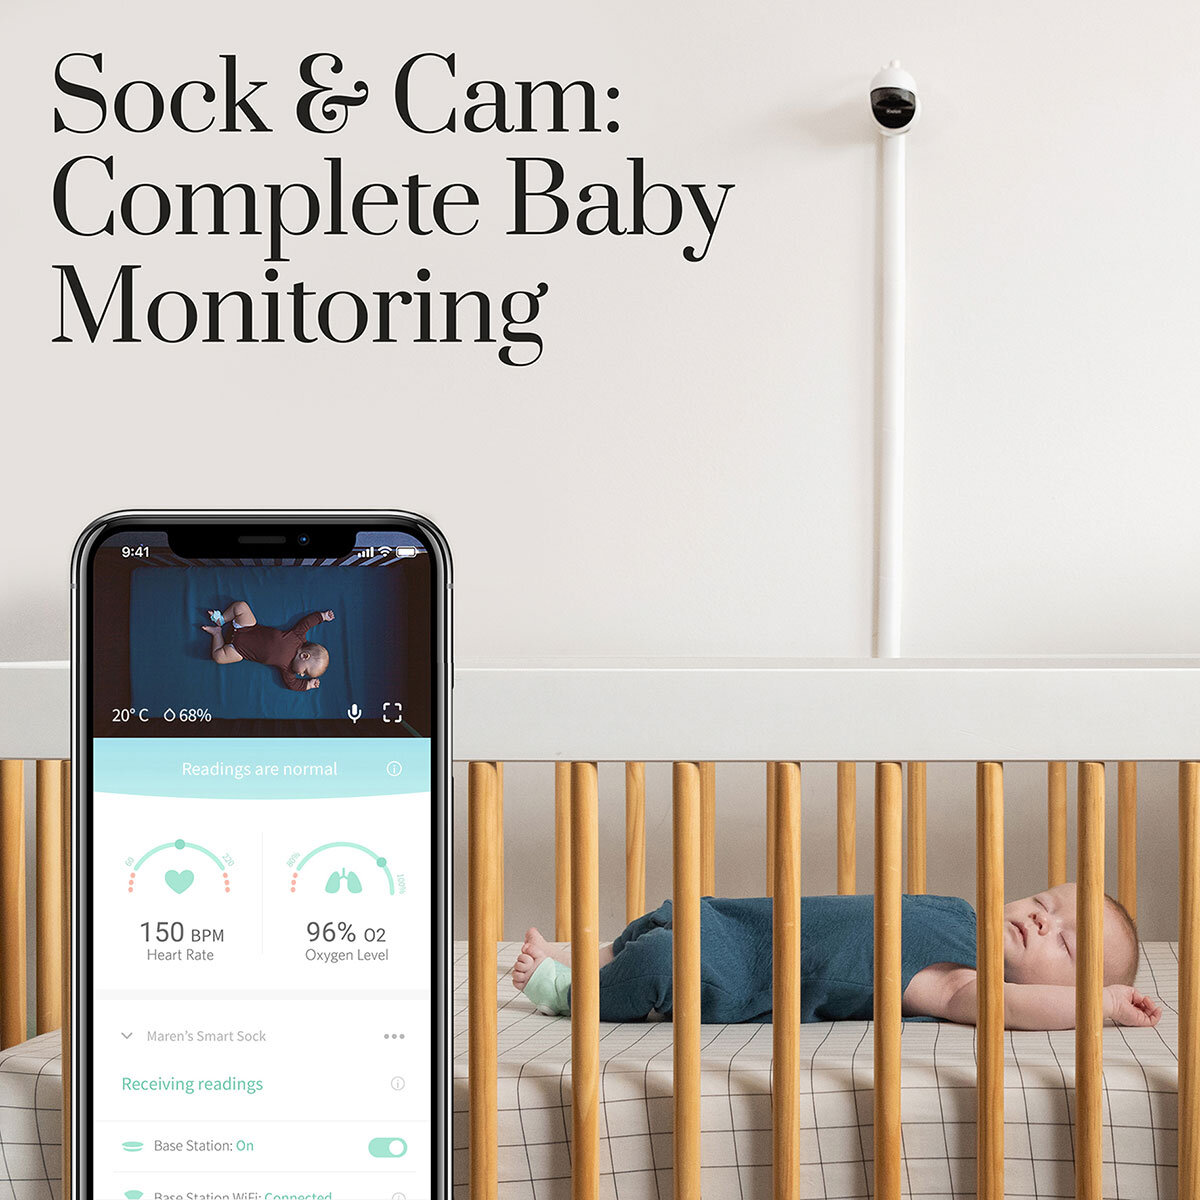 Image of Owlet Monitor Duo with Smar Sock